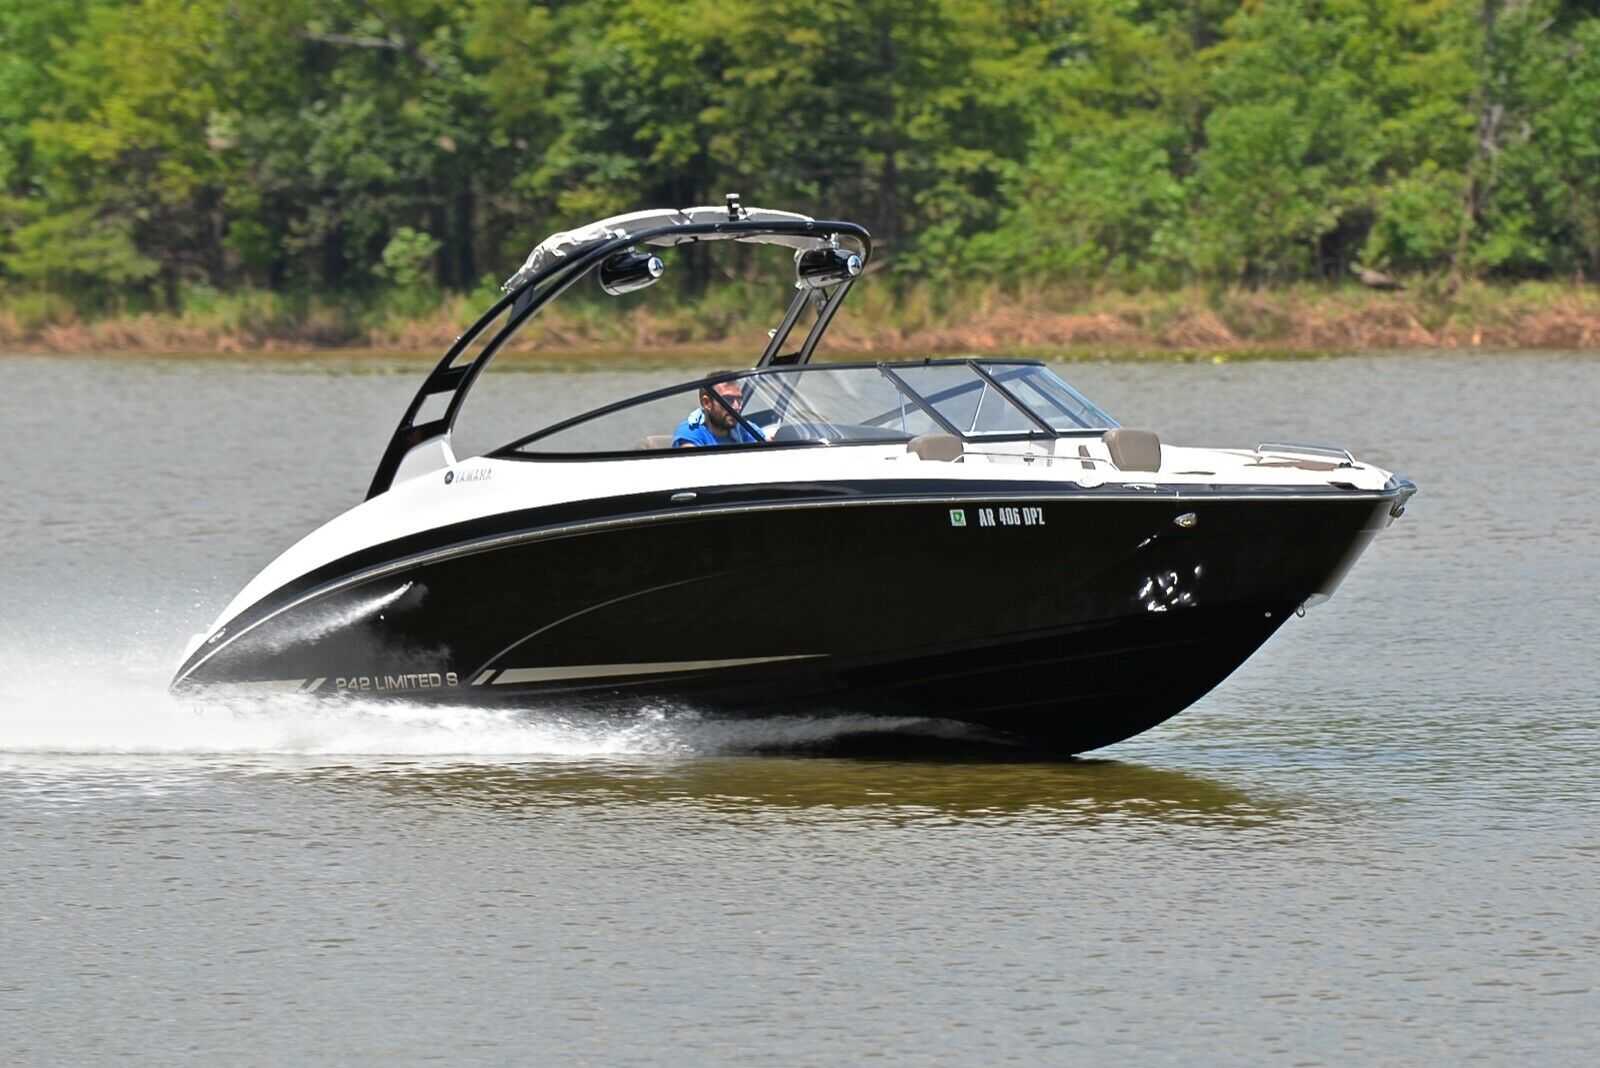 yamaha-242-limited-s-2015-for-sale-for-54-900-boats-from-usa